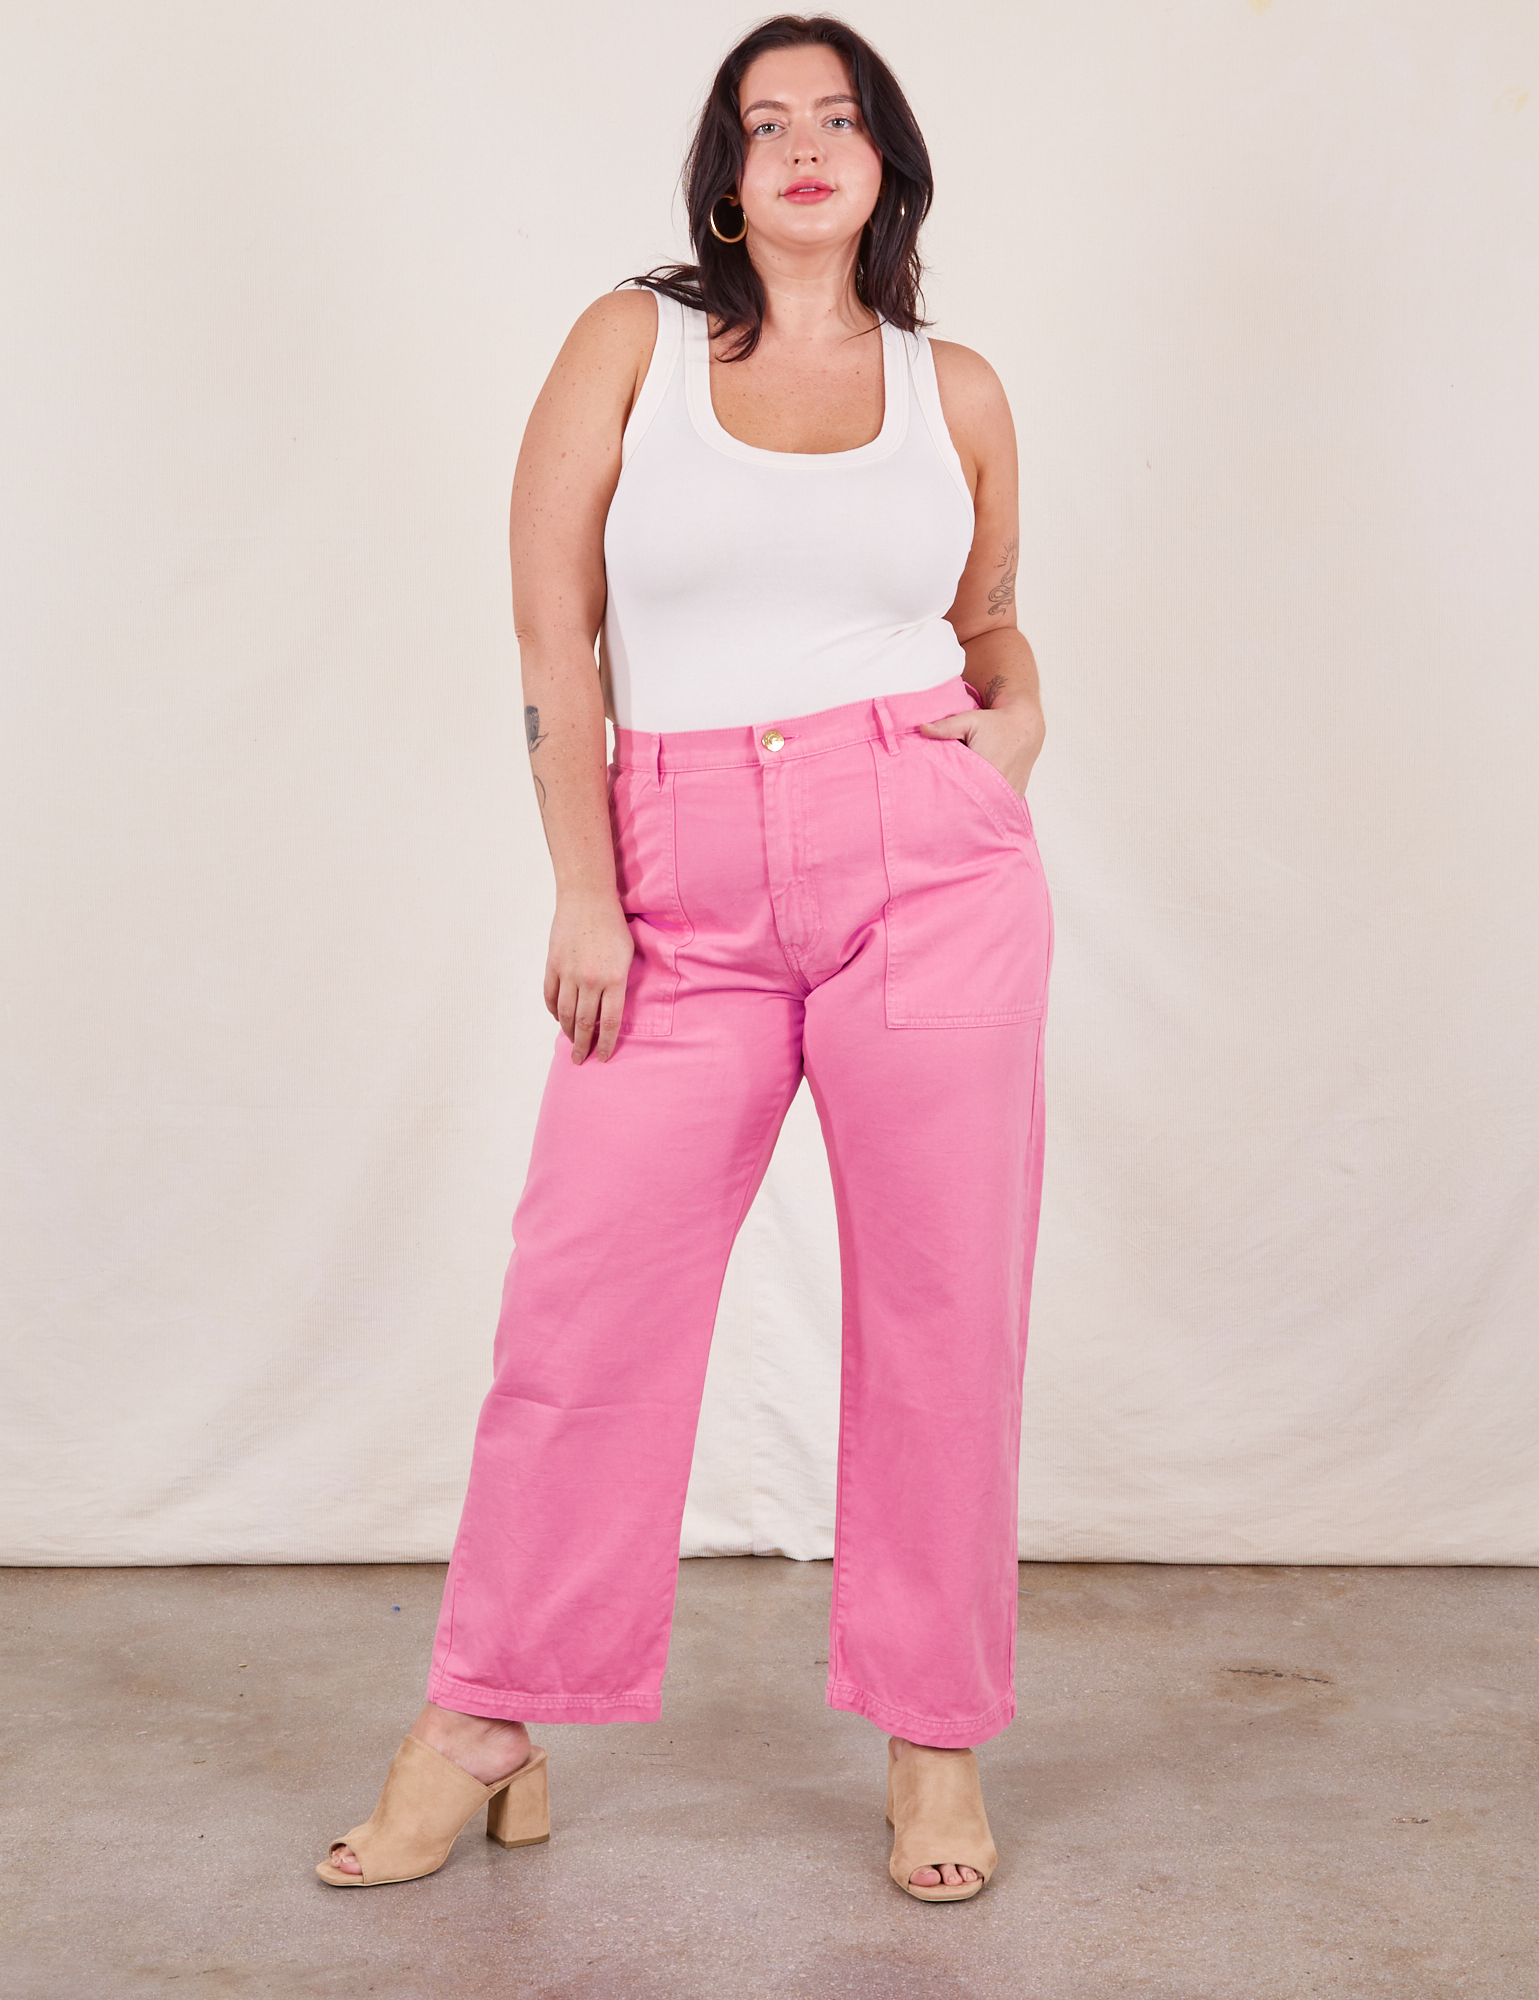 Faye is 5&#39;7&quot; and wearing L Work Pants in Bubblegum Pink paired with a vintage off-white Tank Top